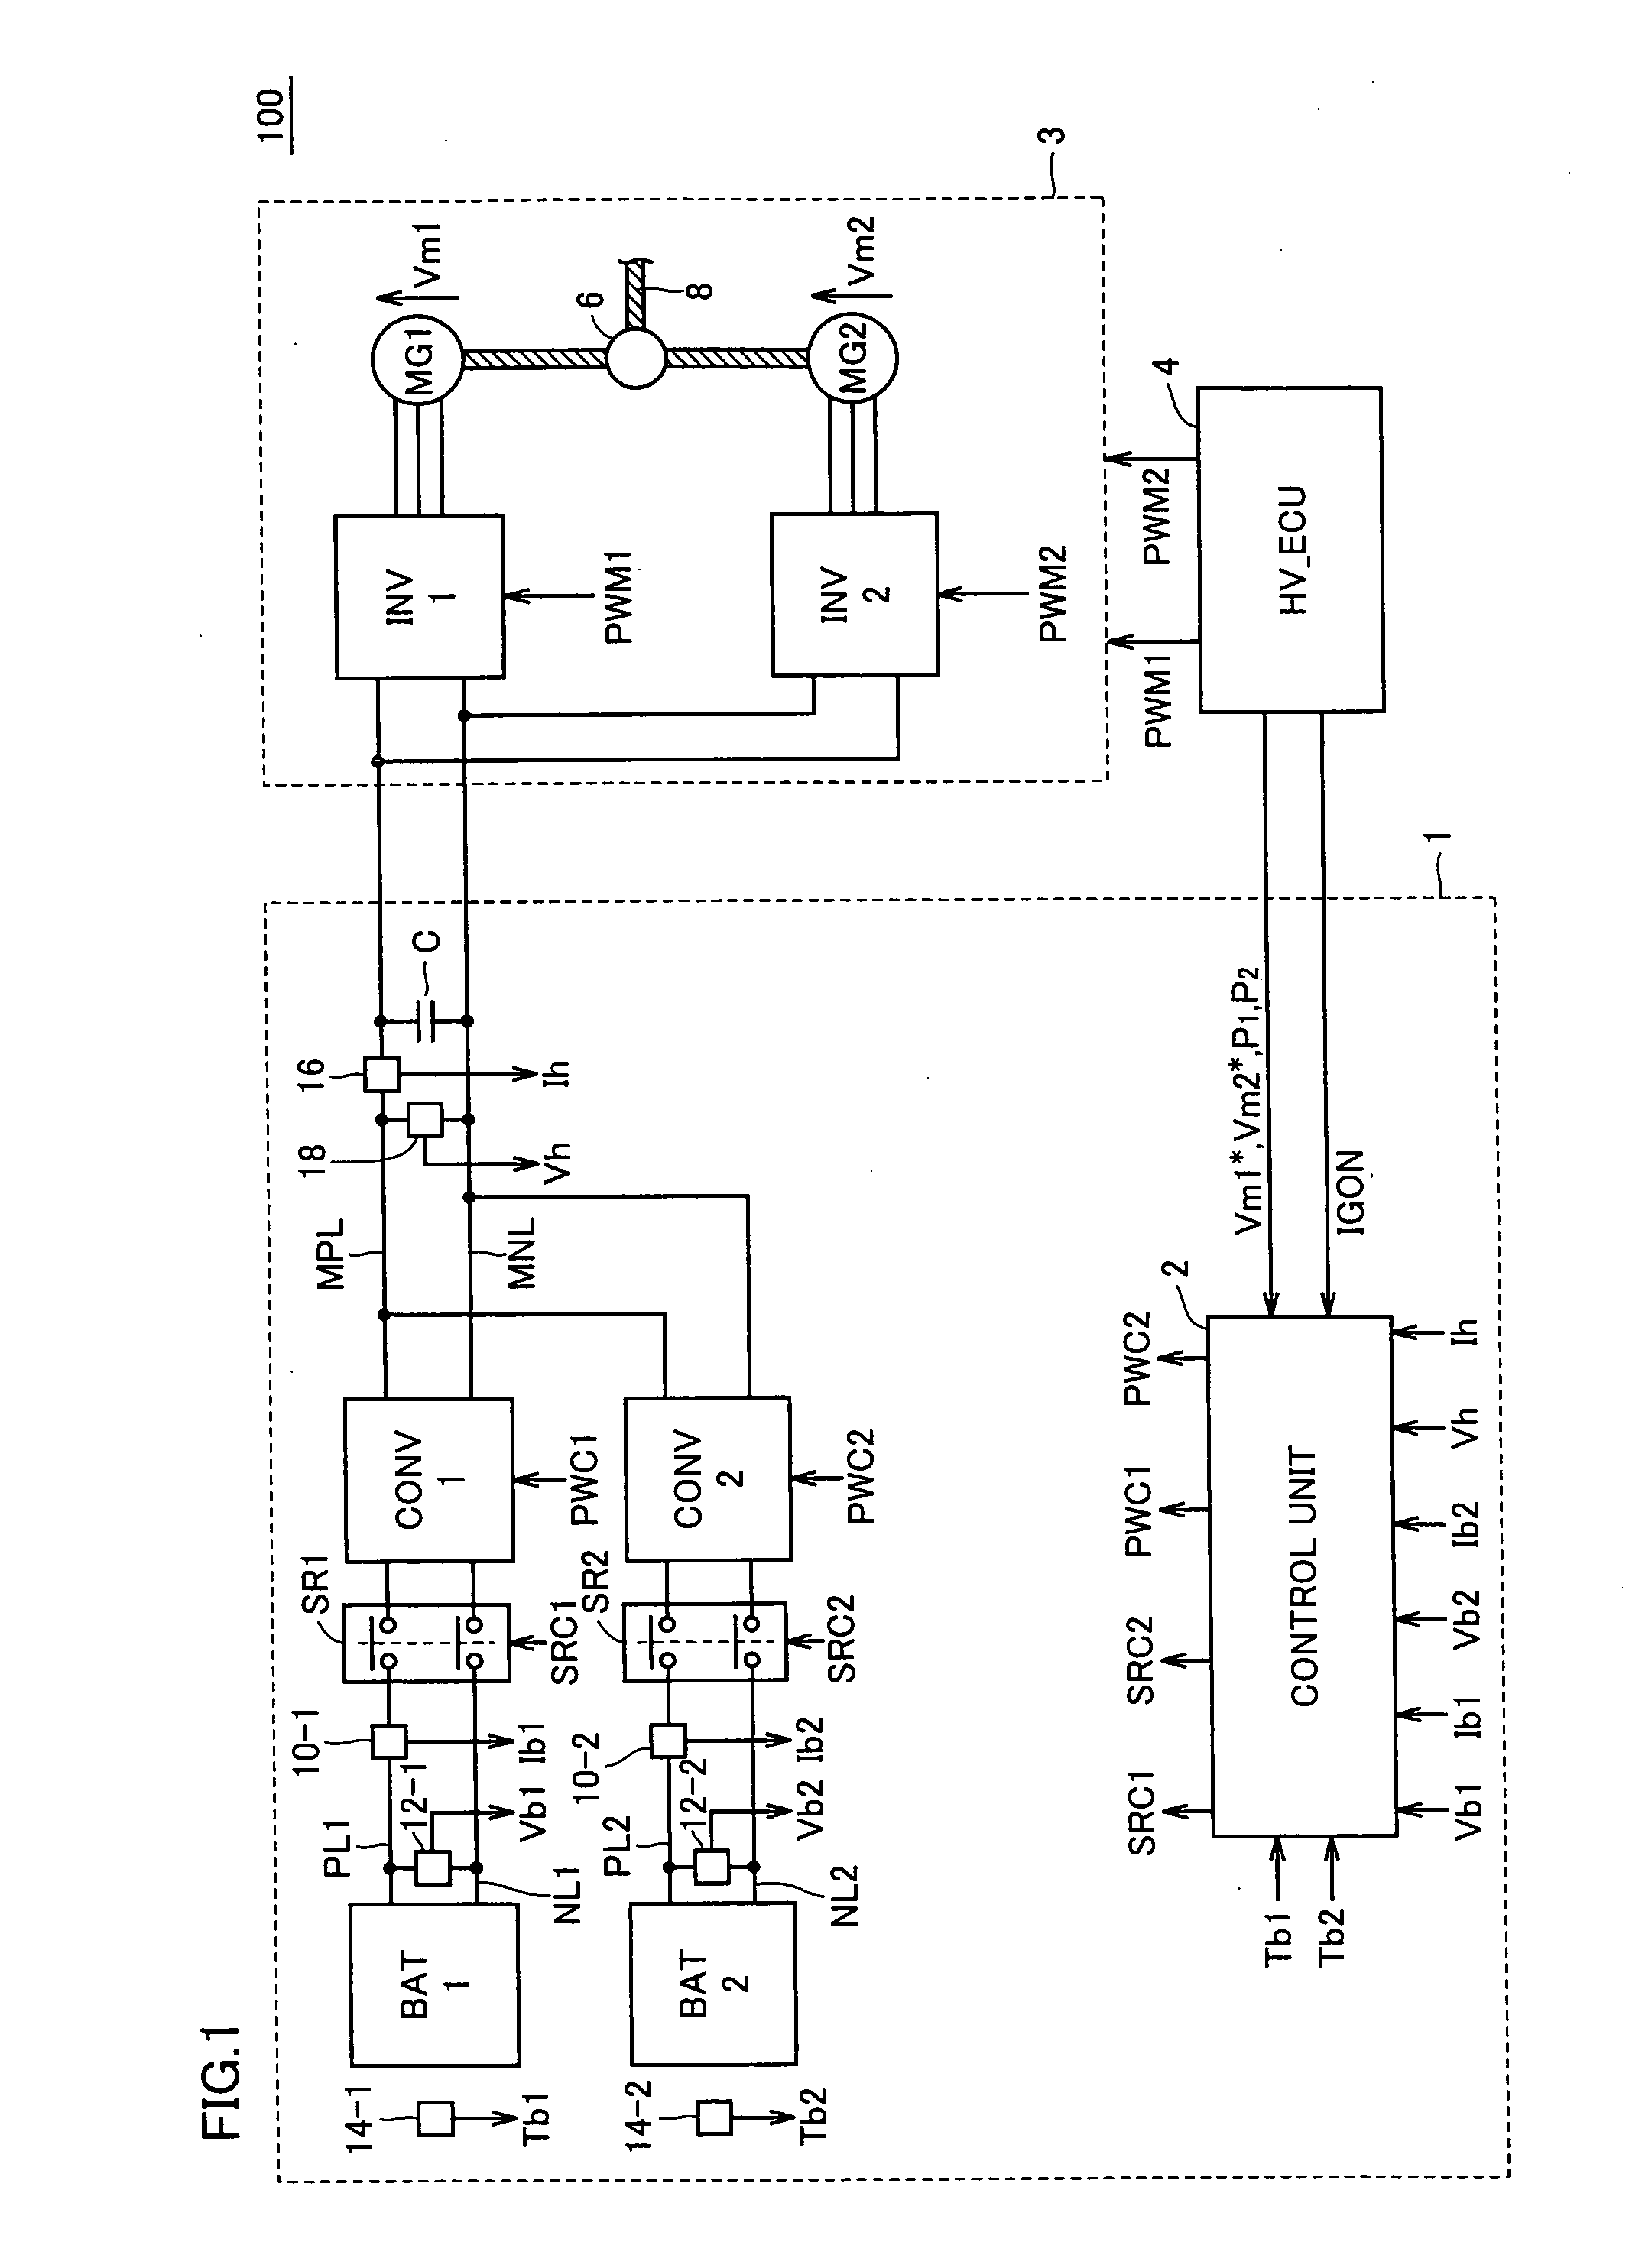 Power Supply System and Vehicle